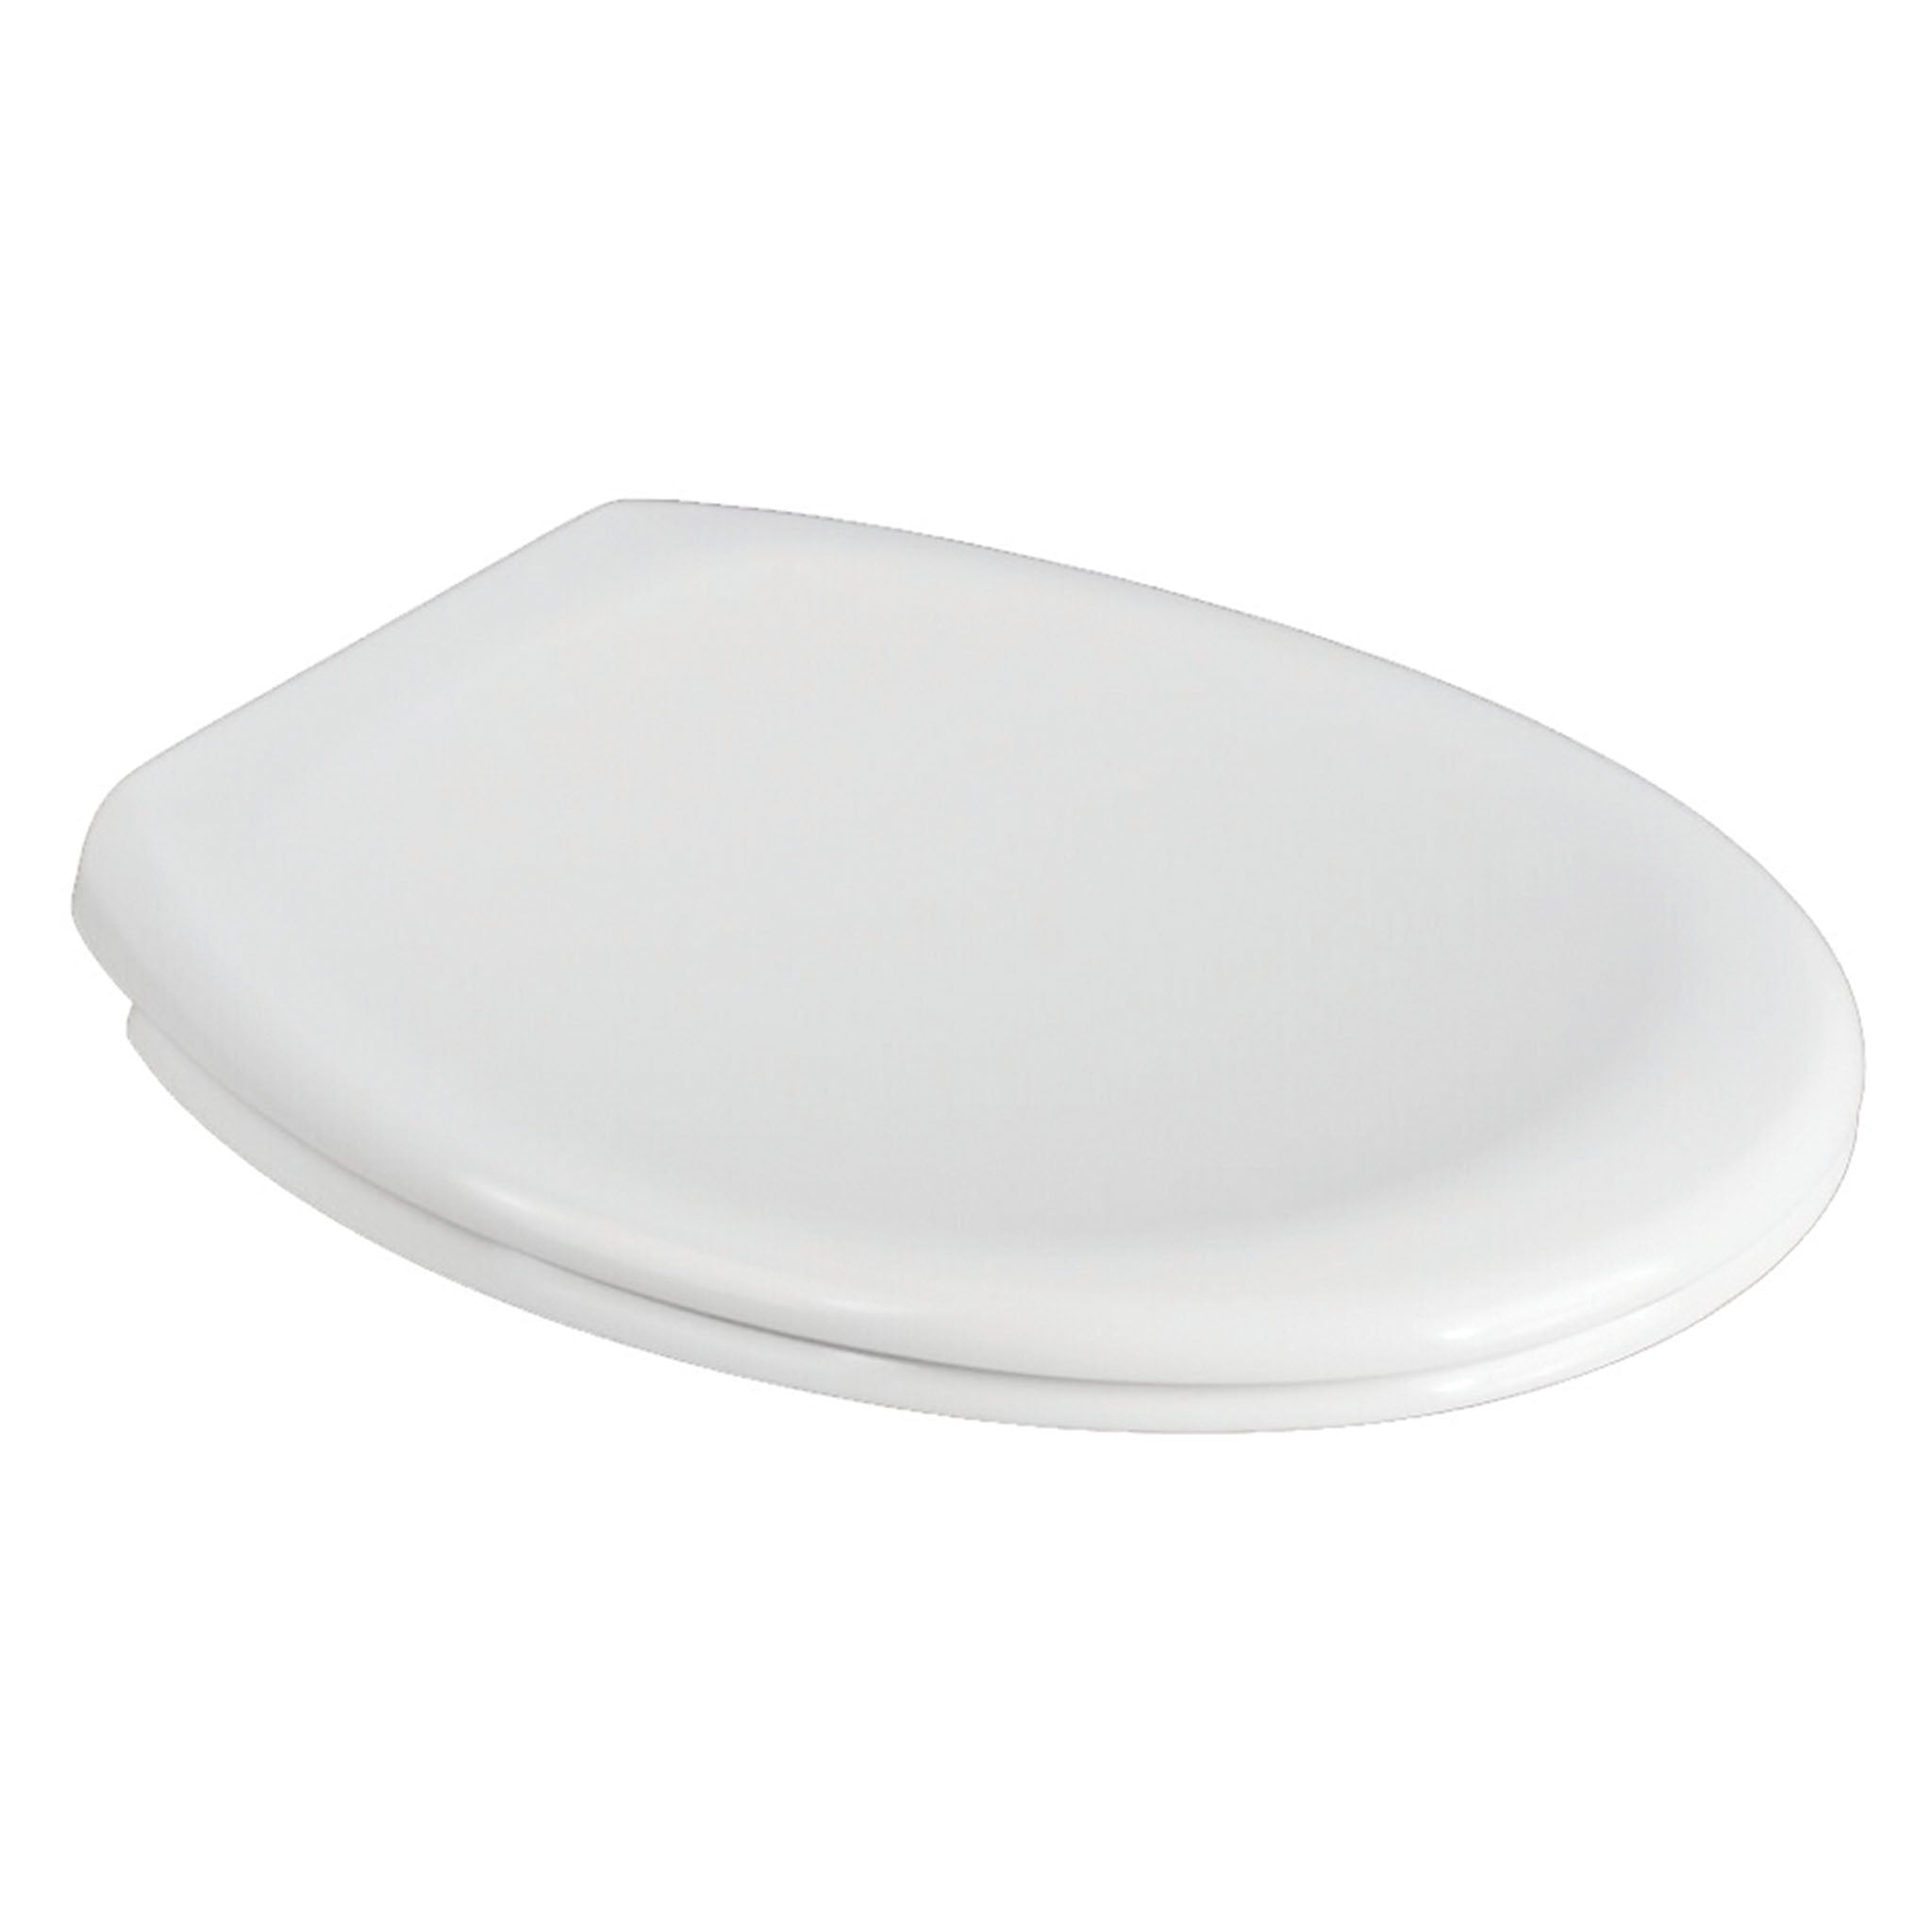 MyLife ST Standard Oval Soft Close Quick Release Toilet Seat